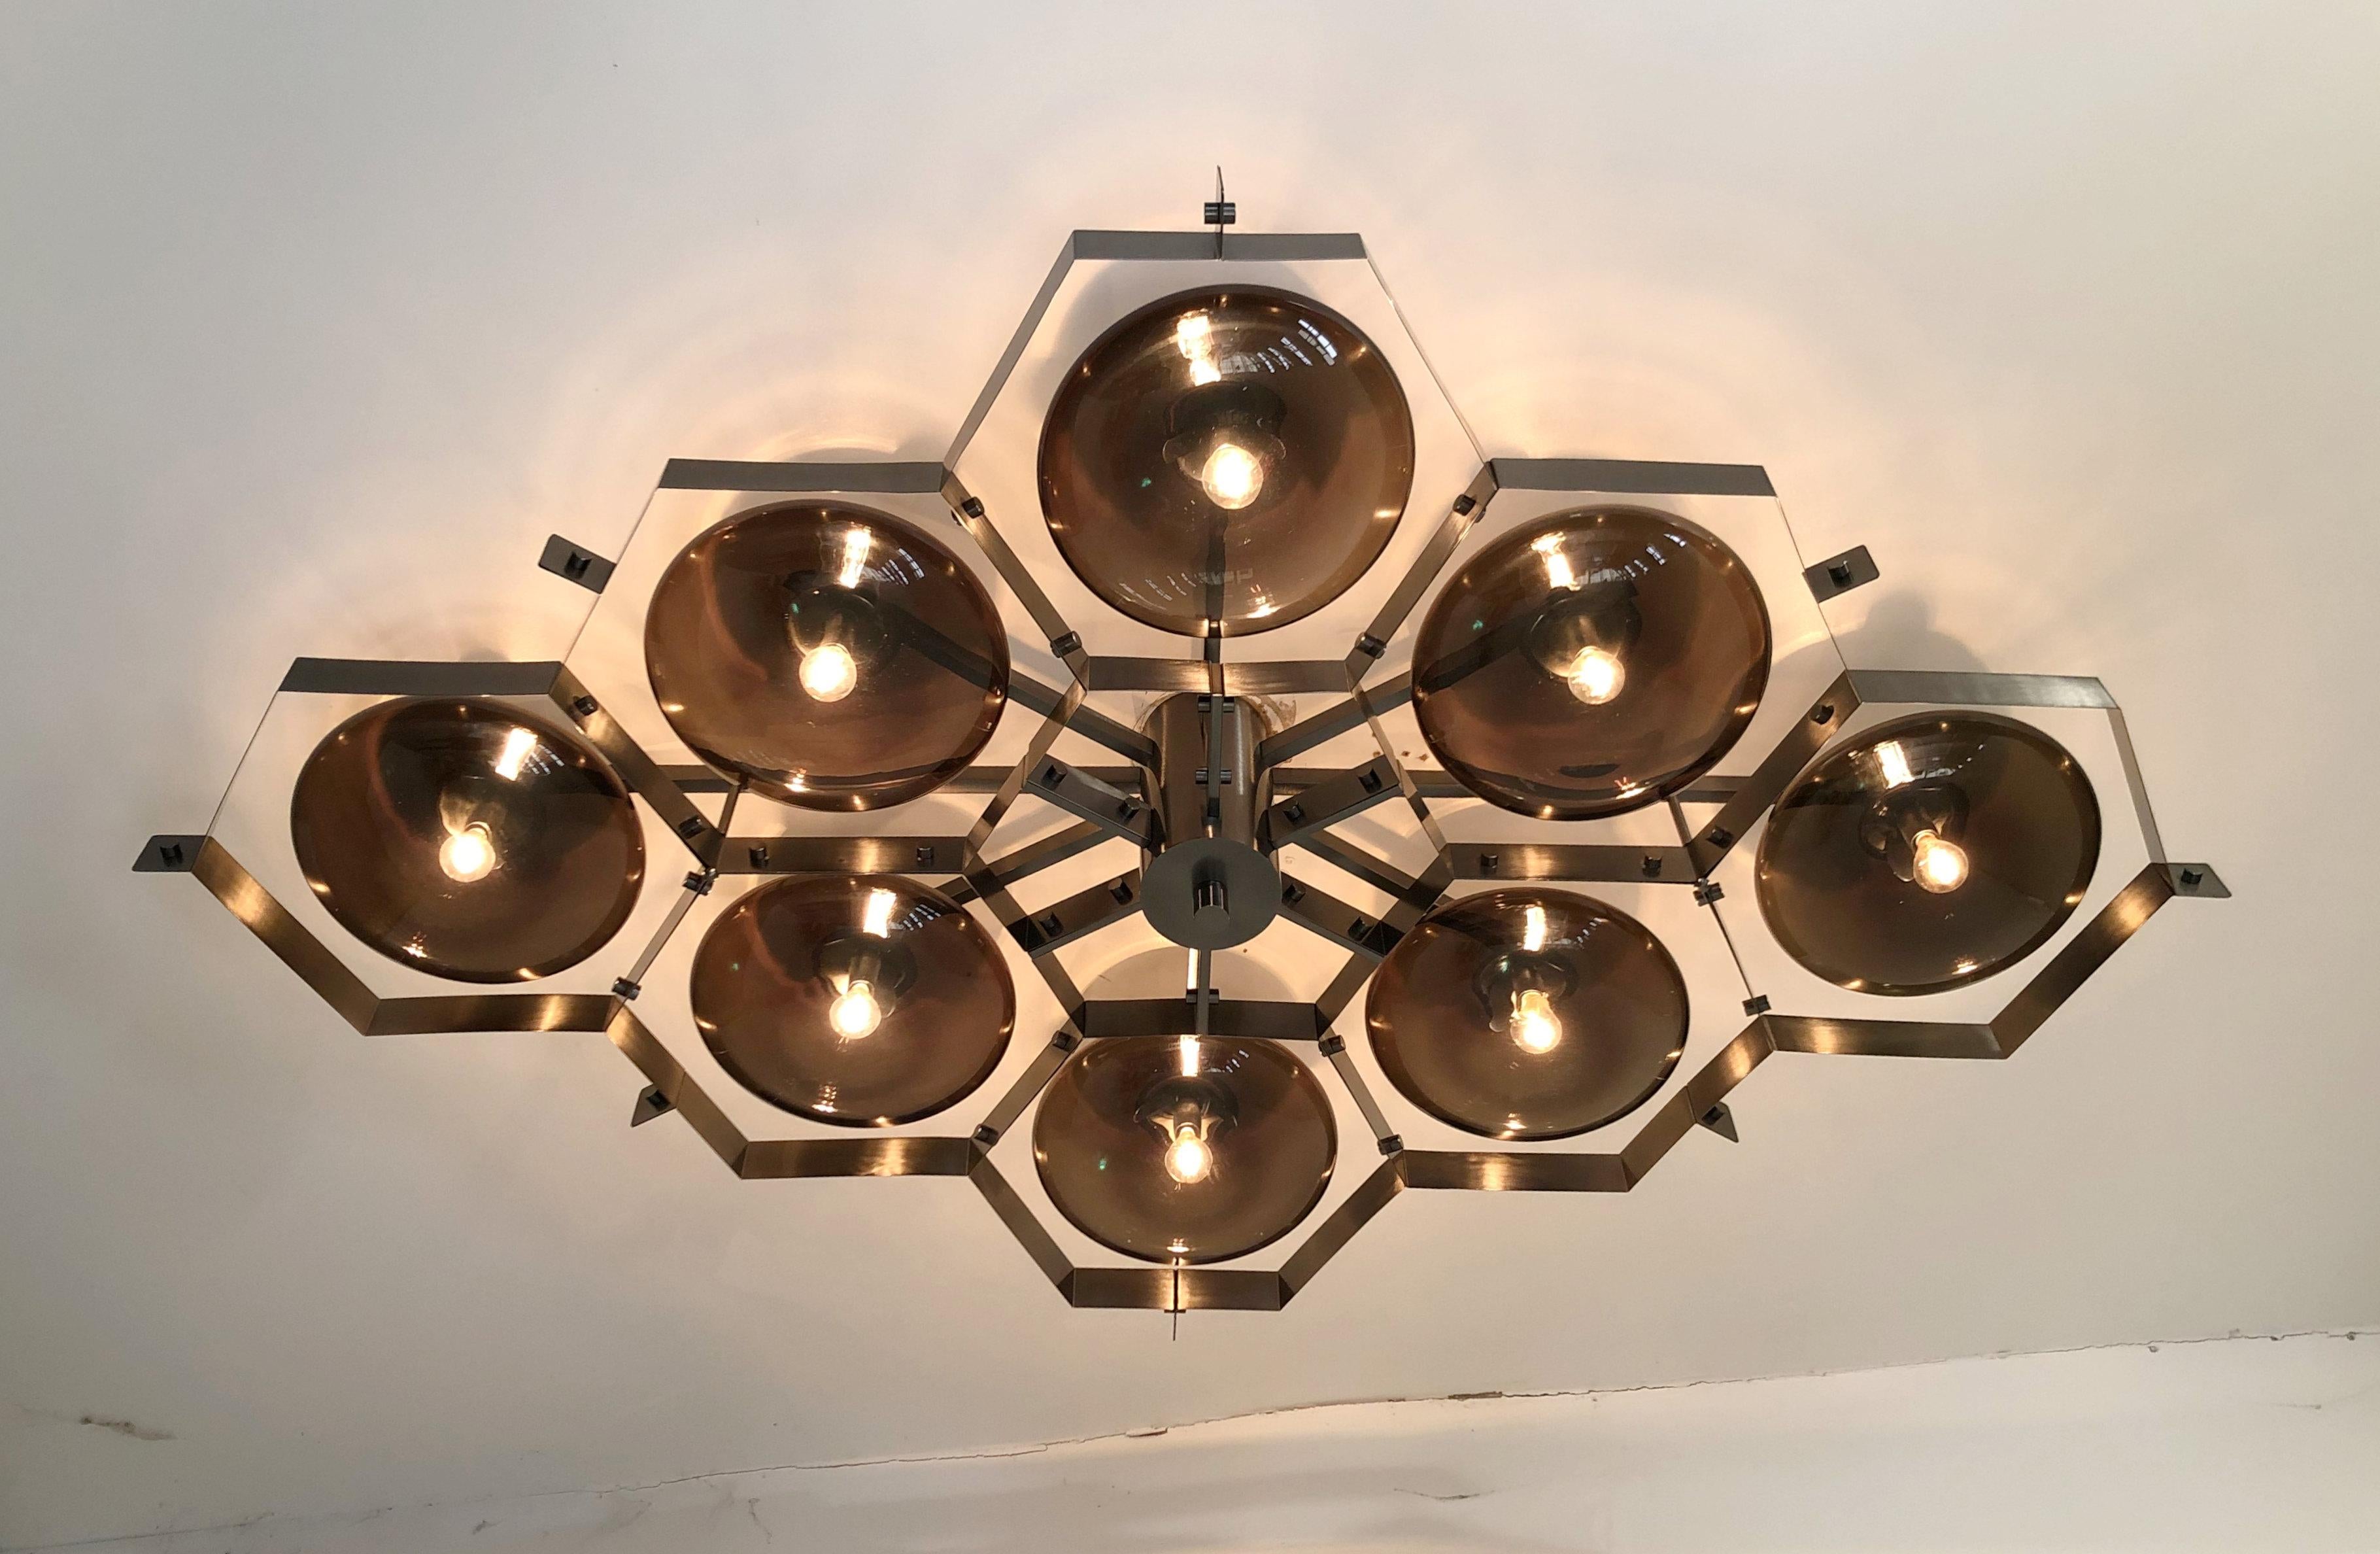 Italian flush mount with Murano glass shades mounted on solid brass frame / Made in Italy
Designed by Fabio Ltd, inspired by Angelo Lelli and Arredoluce styles
8 lights / E12 or E14 type / max 40W each
Length: 69 inches / Width: 46.5 inches /